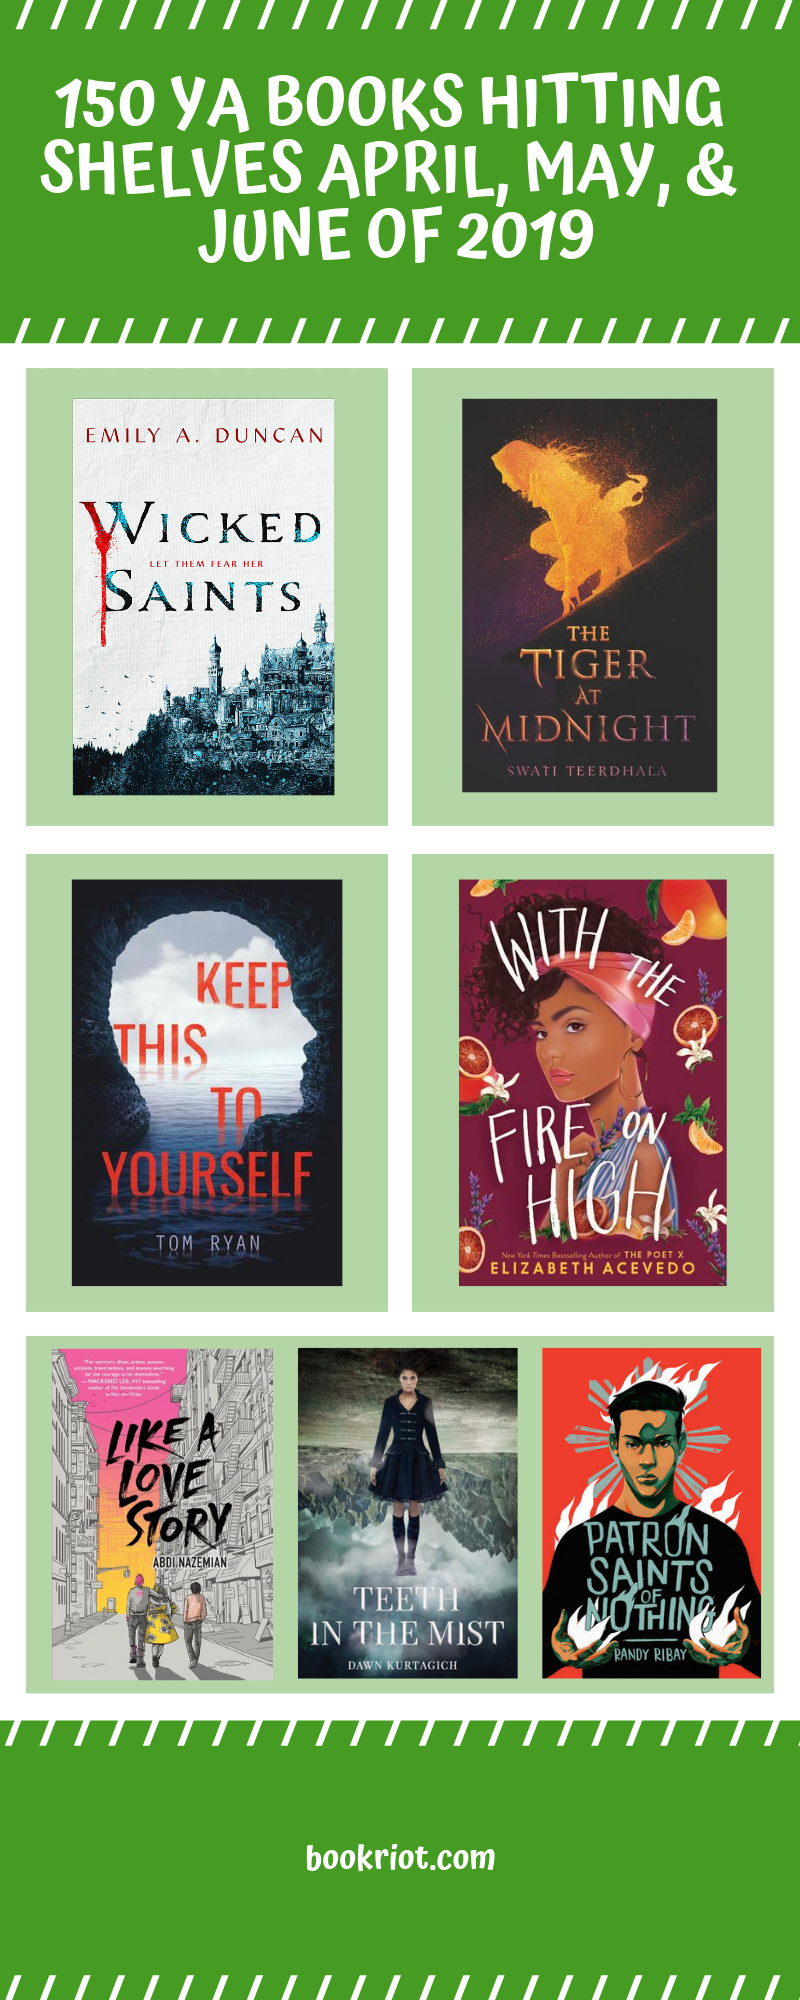 Spring 2019 YA book preview. Get to know the fiction and nonfiction hitting shelves between April and the end of June 2019. book lists | YA book lists | Upcoming YA books | young adult books | young adult fiction | young adult nonfiction | YA book preview | #YALit | great books to read | books to read spring 2019 | spring 2019 new books